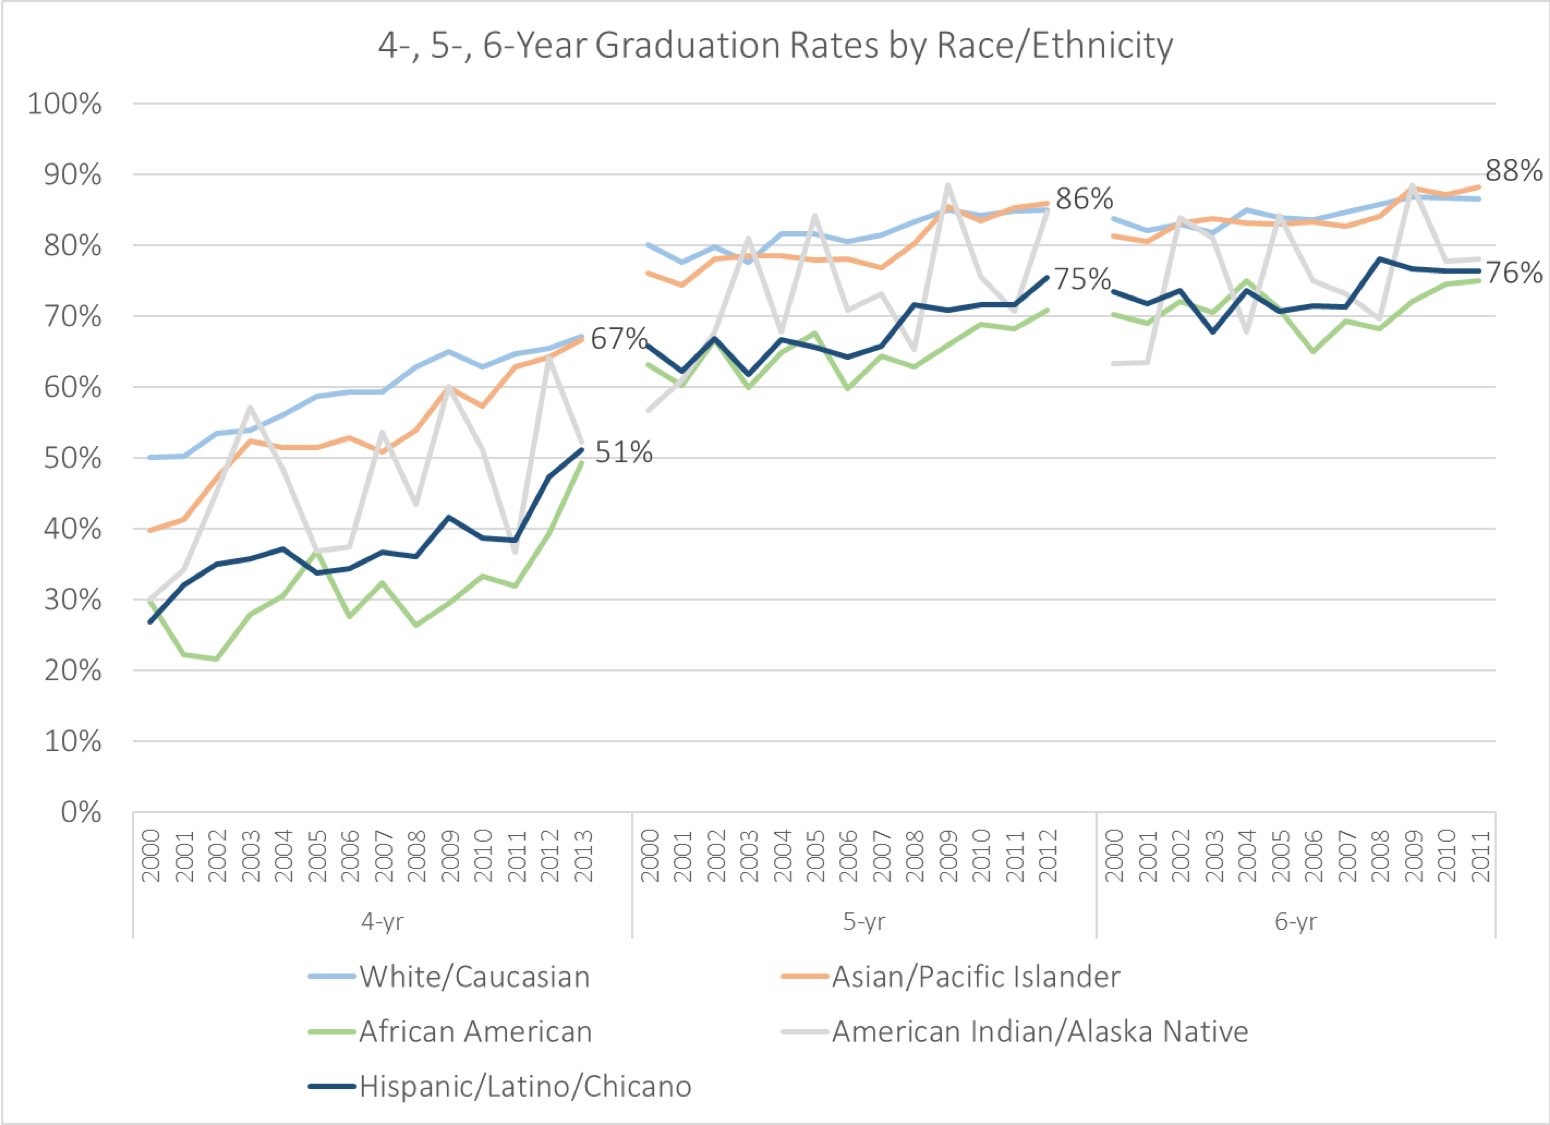 Figure 18. gaps in 4-, 5-, 6- graduation rates between chicanx/latinx and white or asian students have persisted over several cohorts. source: Budget and institutional analysis/student Retention advisory committee